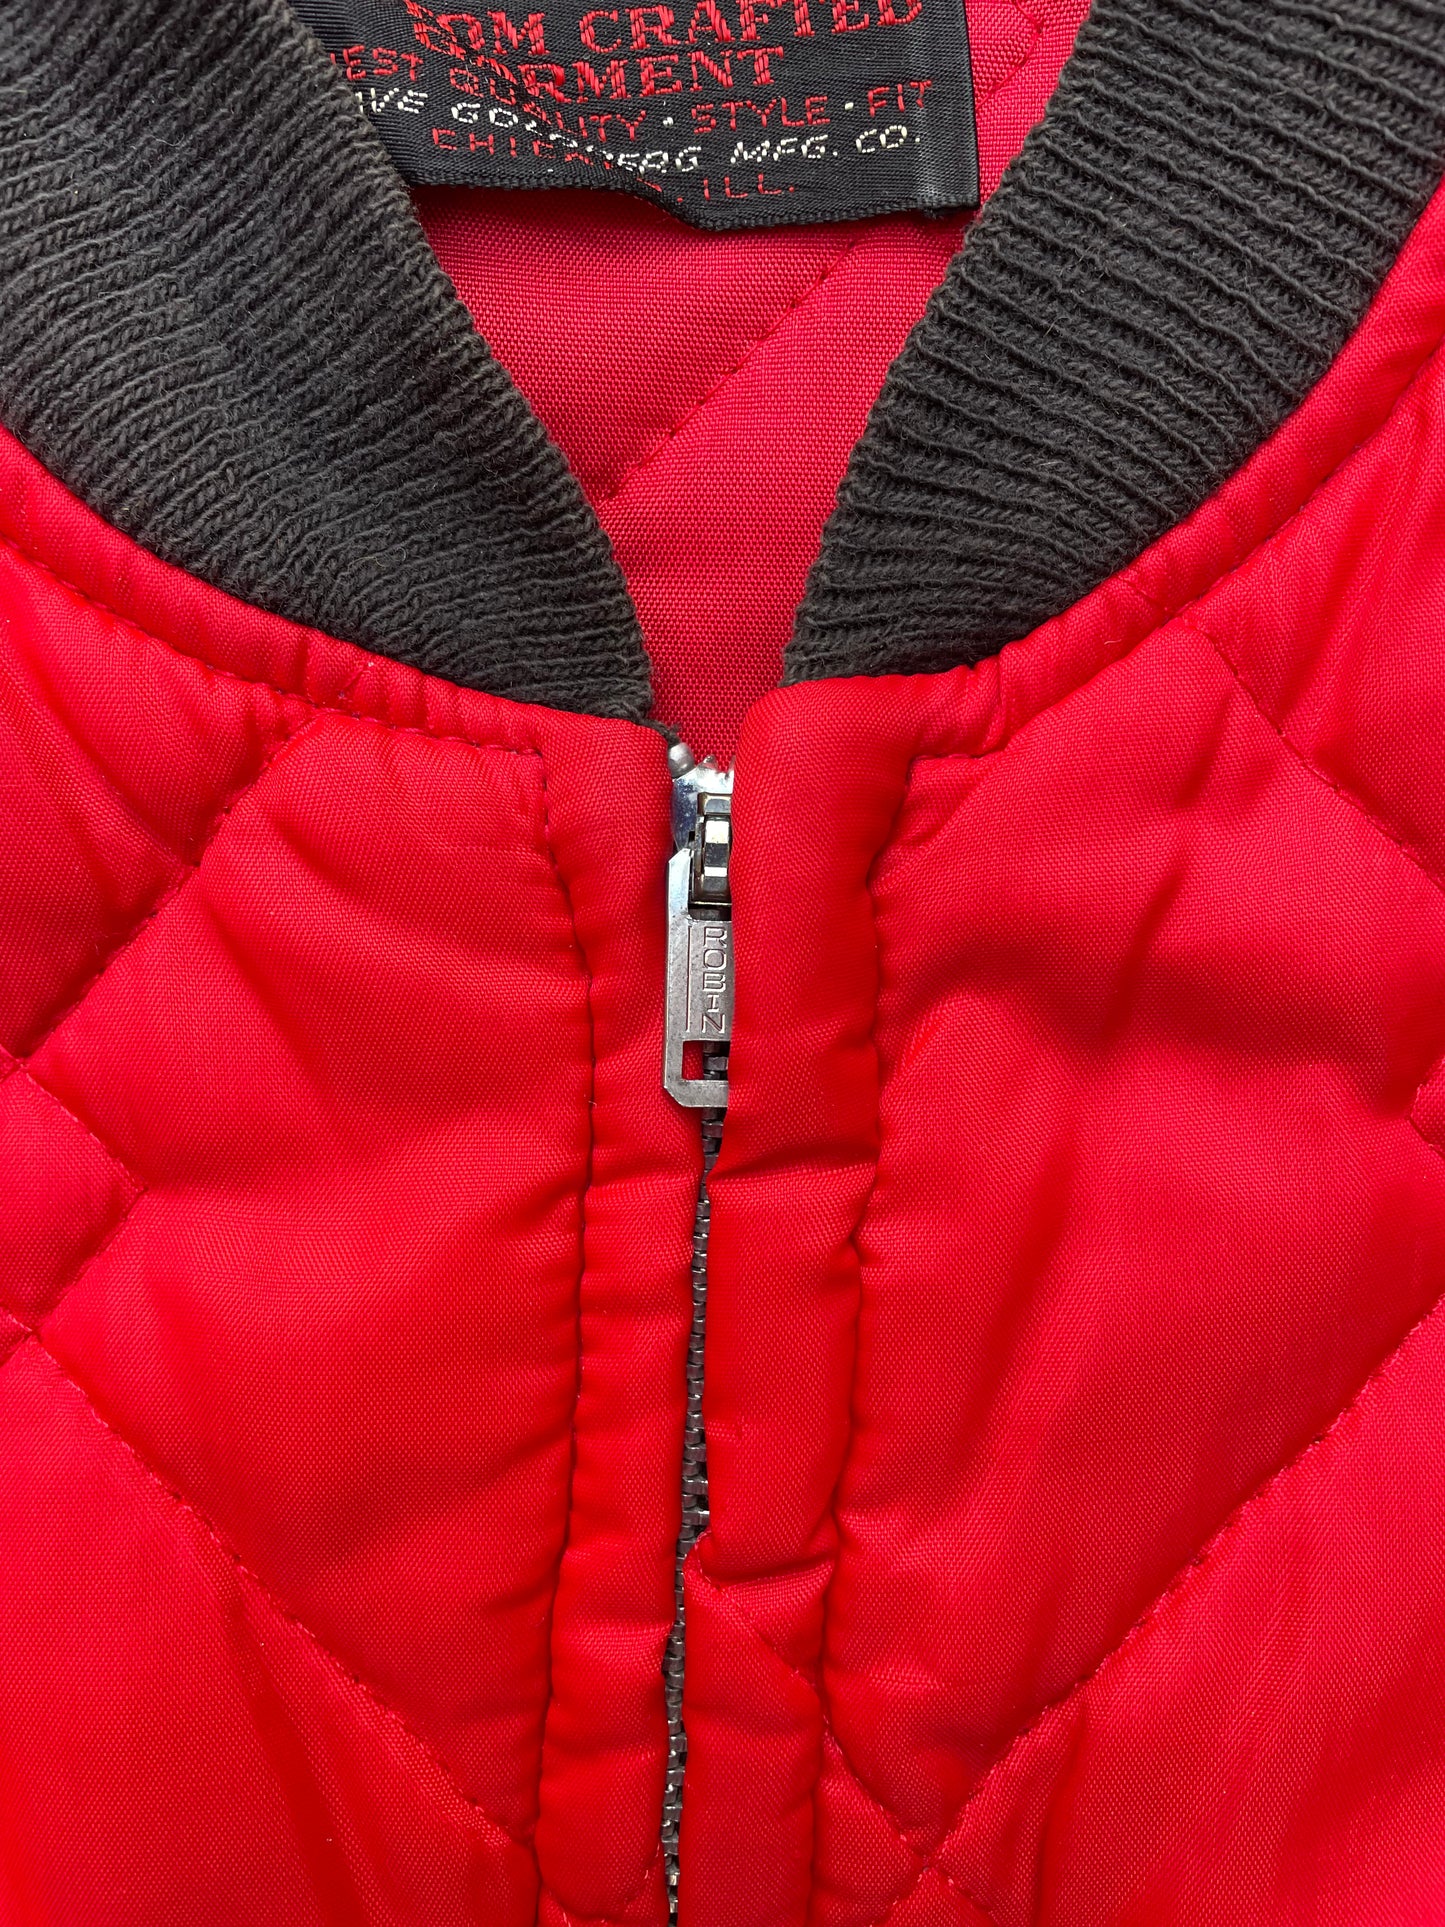 1960’s Davco Red Quilted Insulated Liner Jacket - L